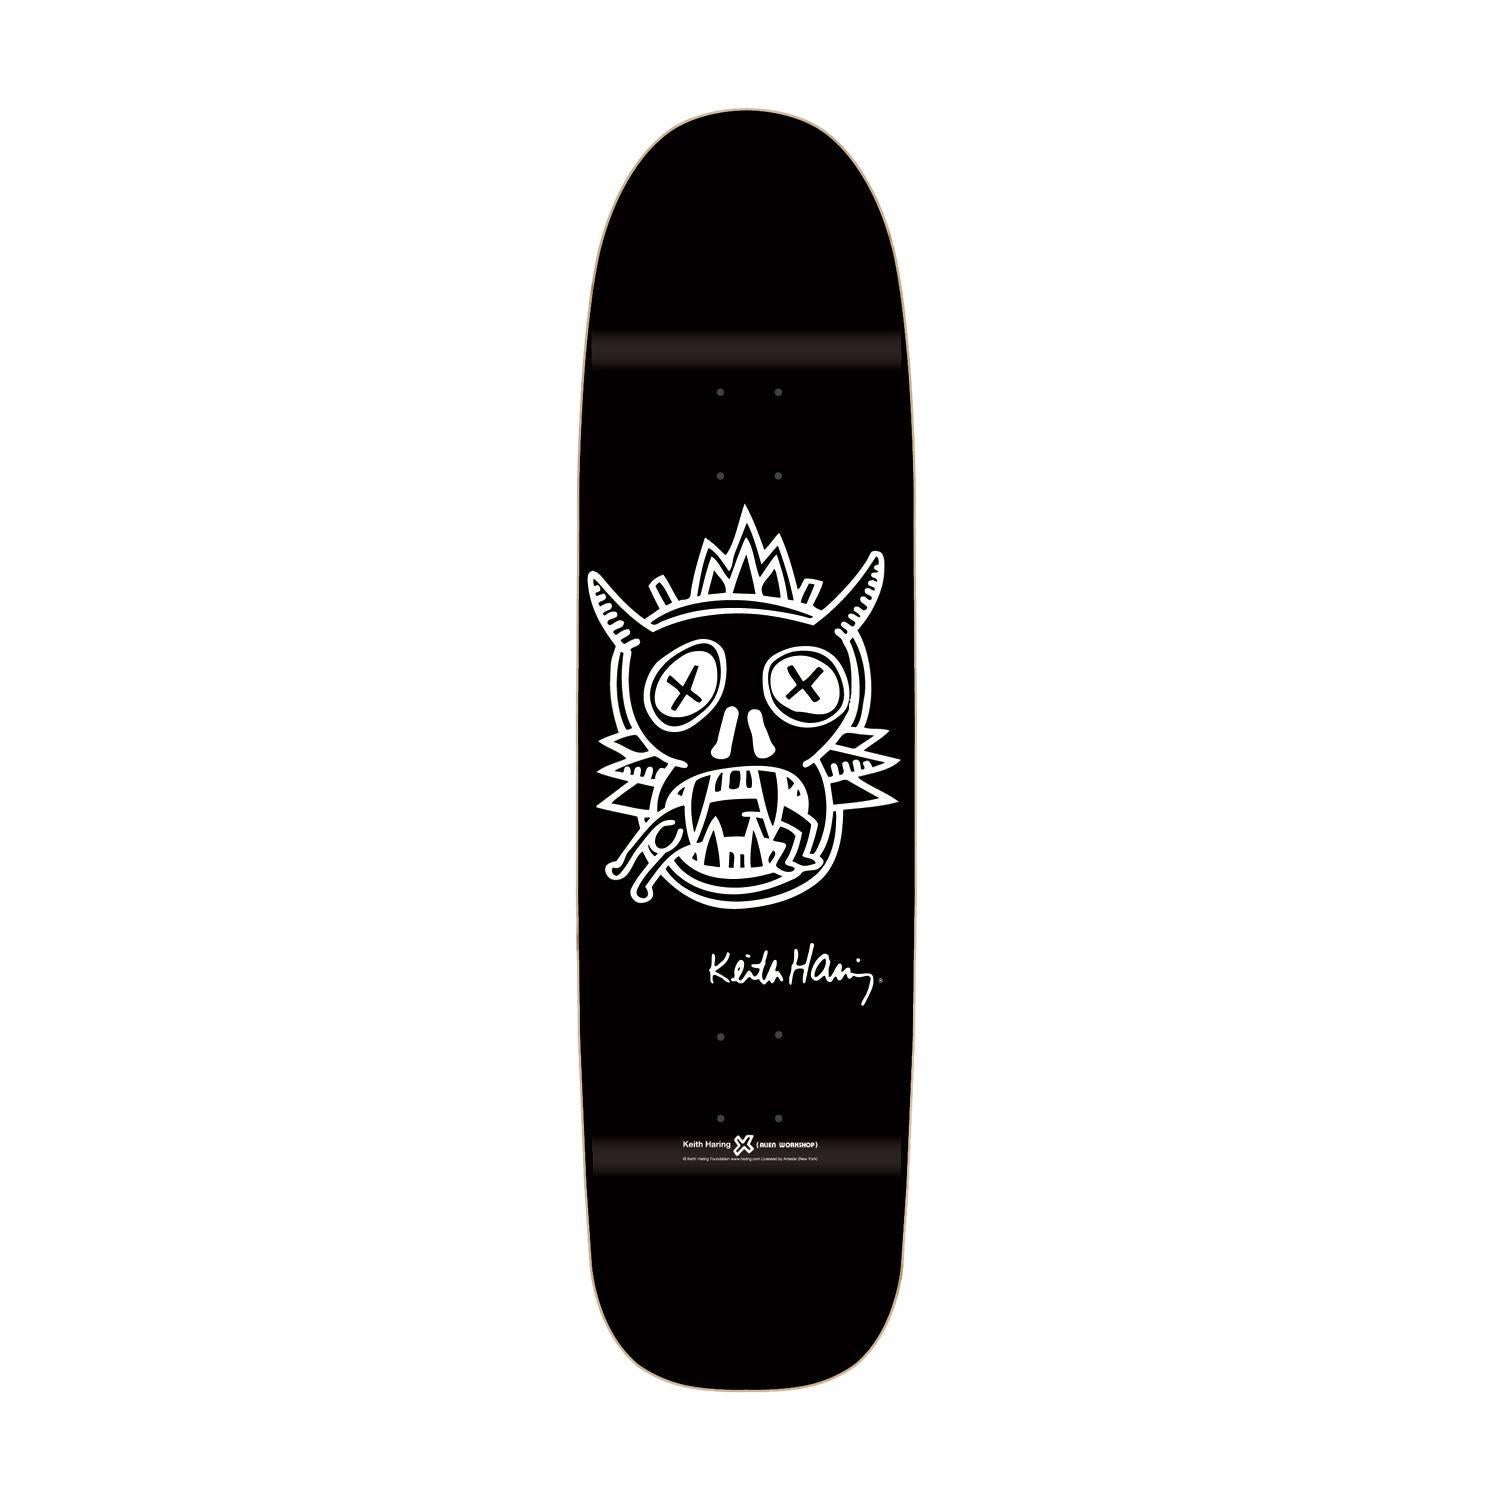 Keith Haring Skate Deck (Black) - Art by (after) Keith Haring